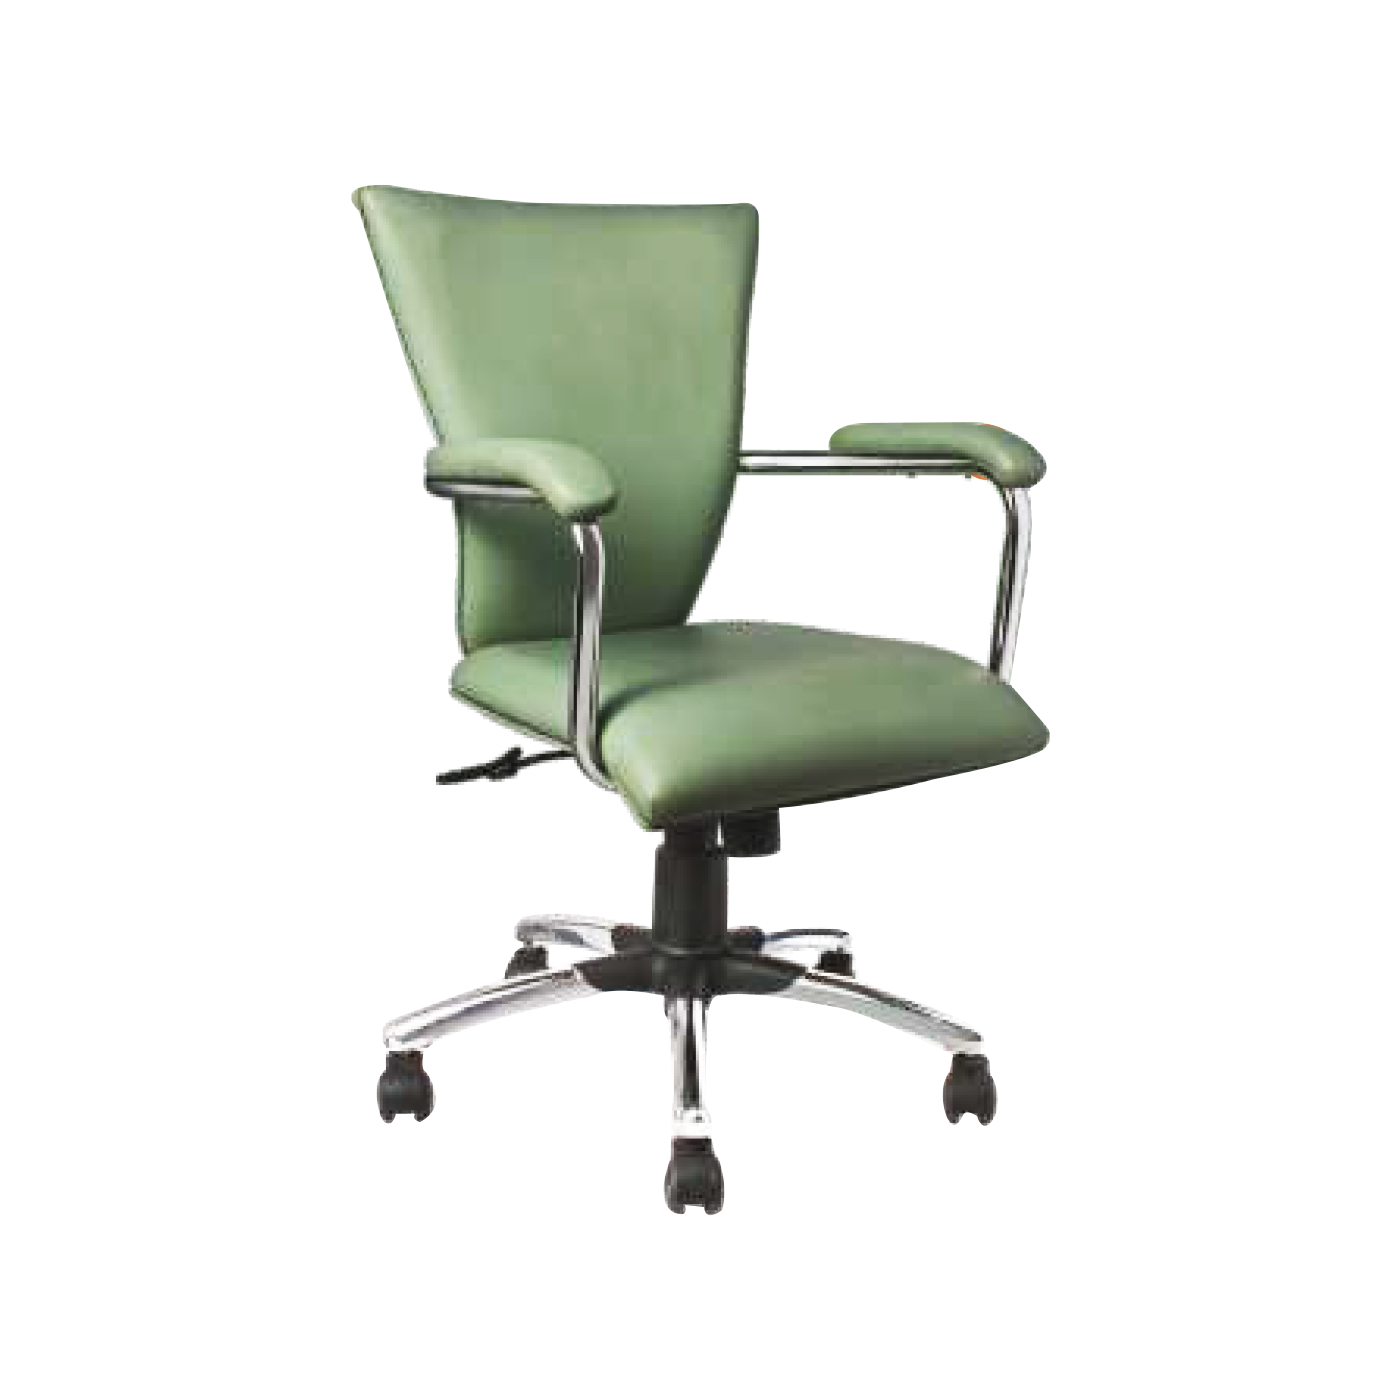 Detec™ Junior Executive chair with tilting mechanism top cushion arm hydraulic crome base in Green Color 